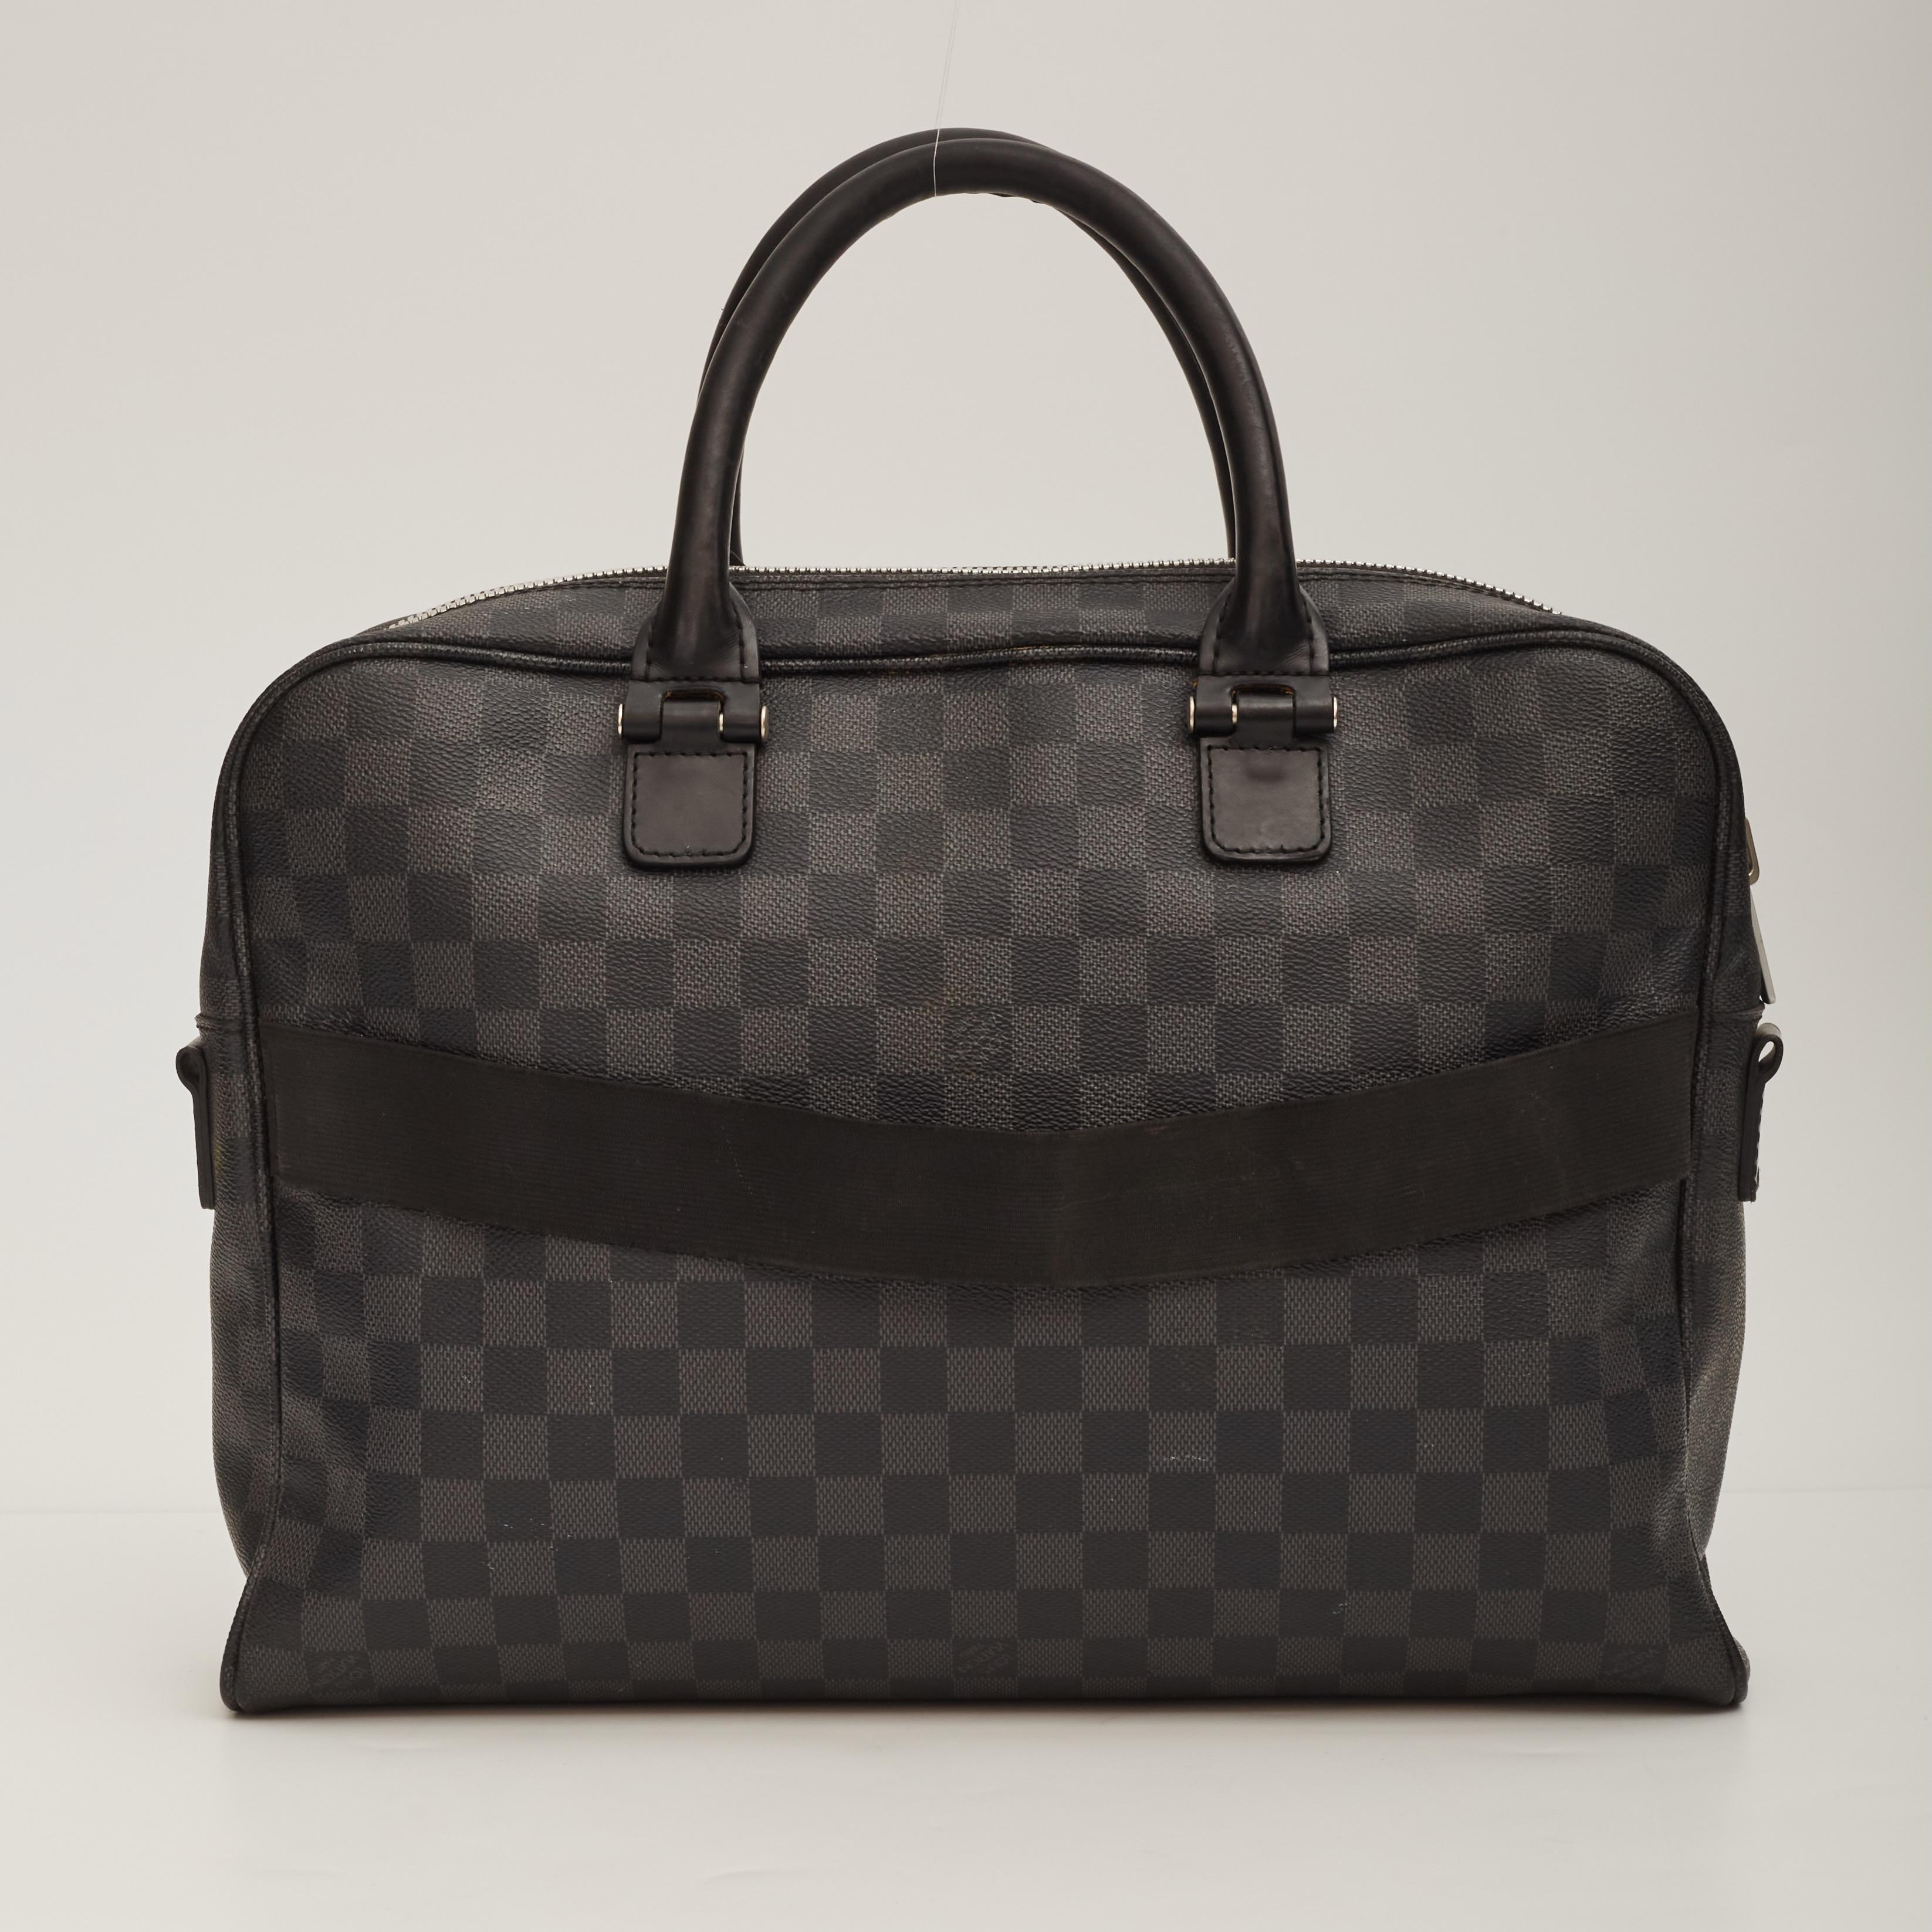 Black damier graphite coated canvas exterior. Dual rolled leather top handles. Top zip closure. Black woven fabric lining. Silver hardware. Front zip pocket. Back canvas strap. 

Color: Black
Material: Coated canvas
Date Code: SR4186
Measures: H 11”